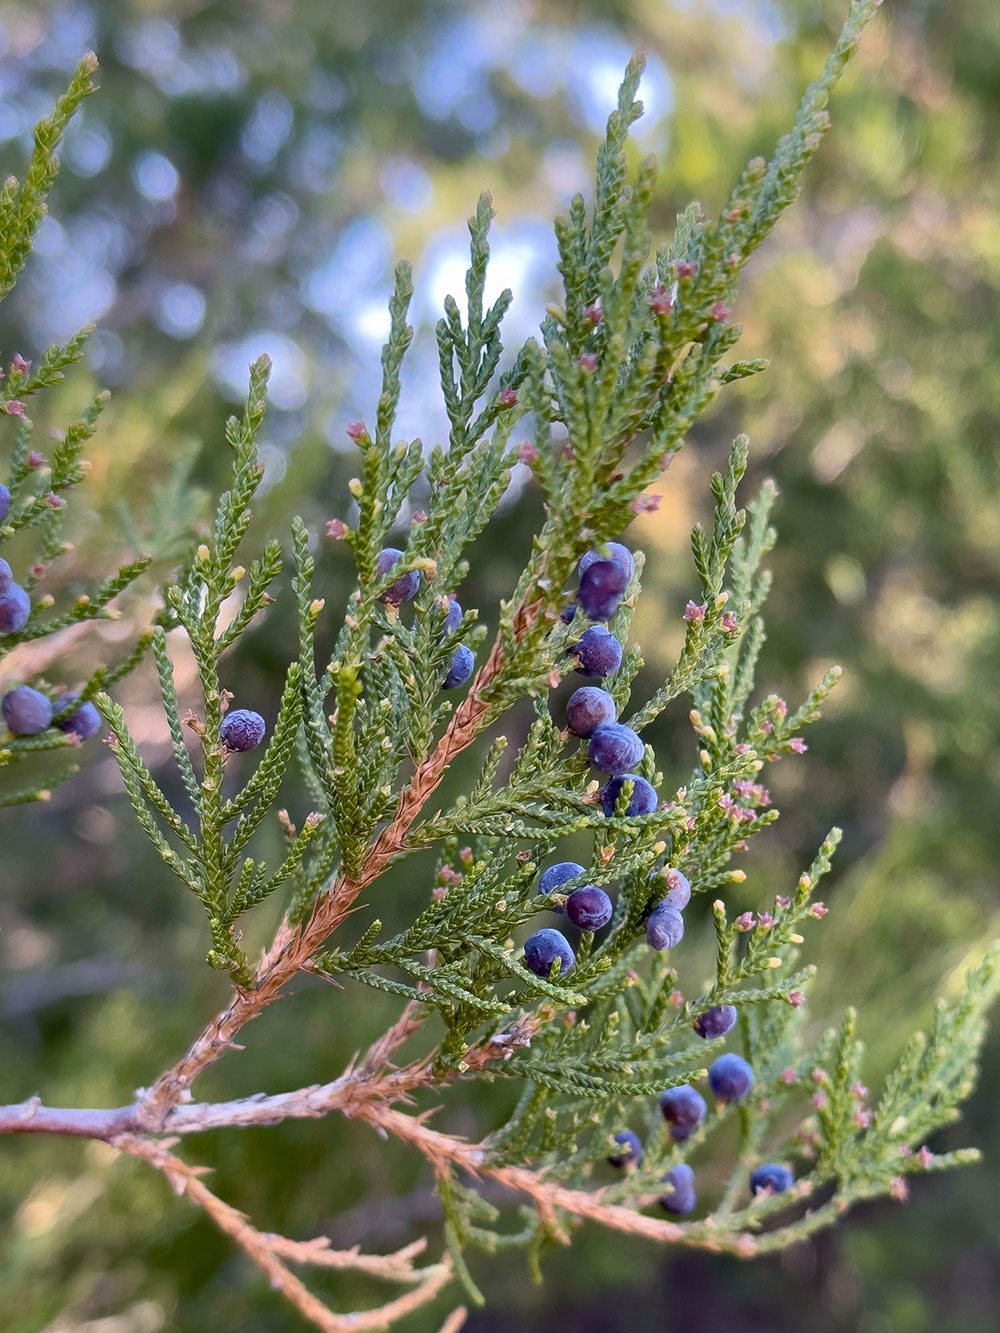 A Redcedar branch with blue berries